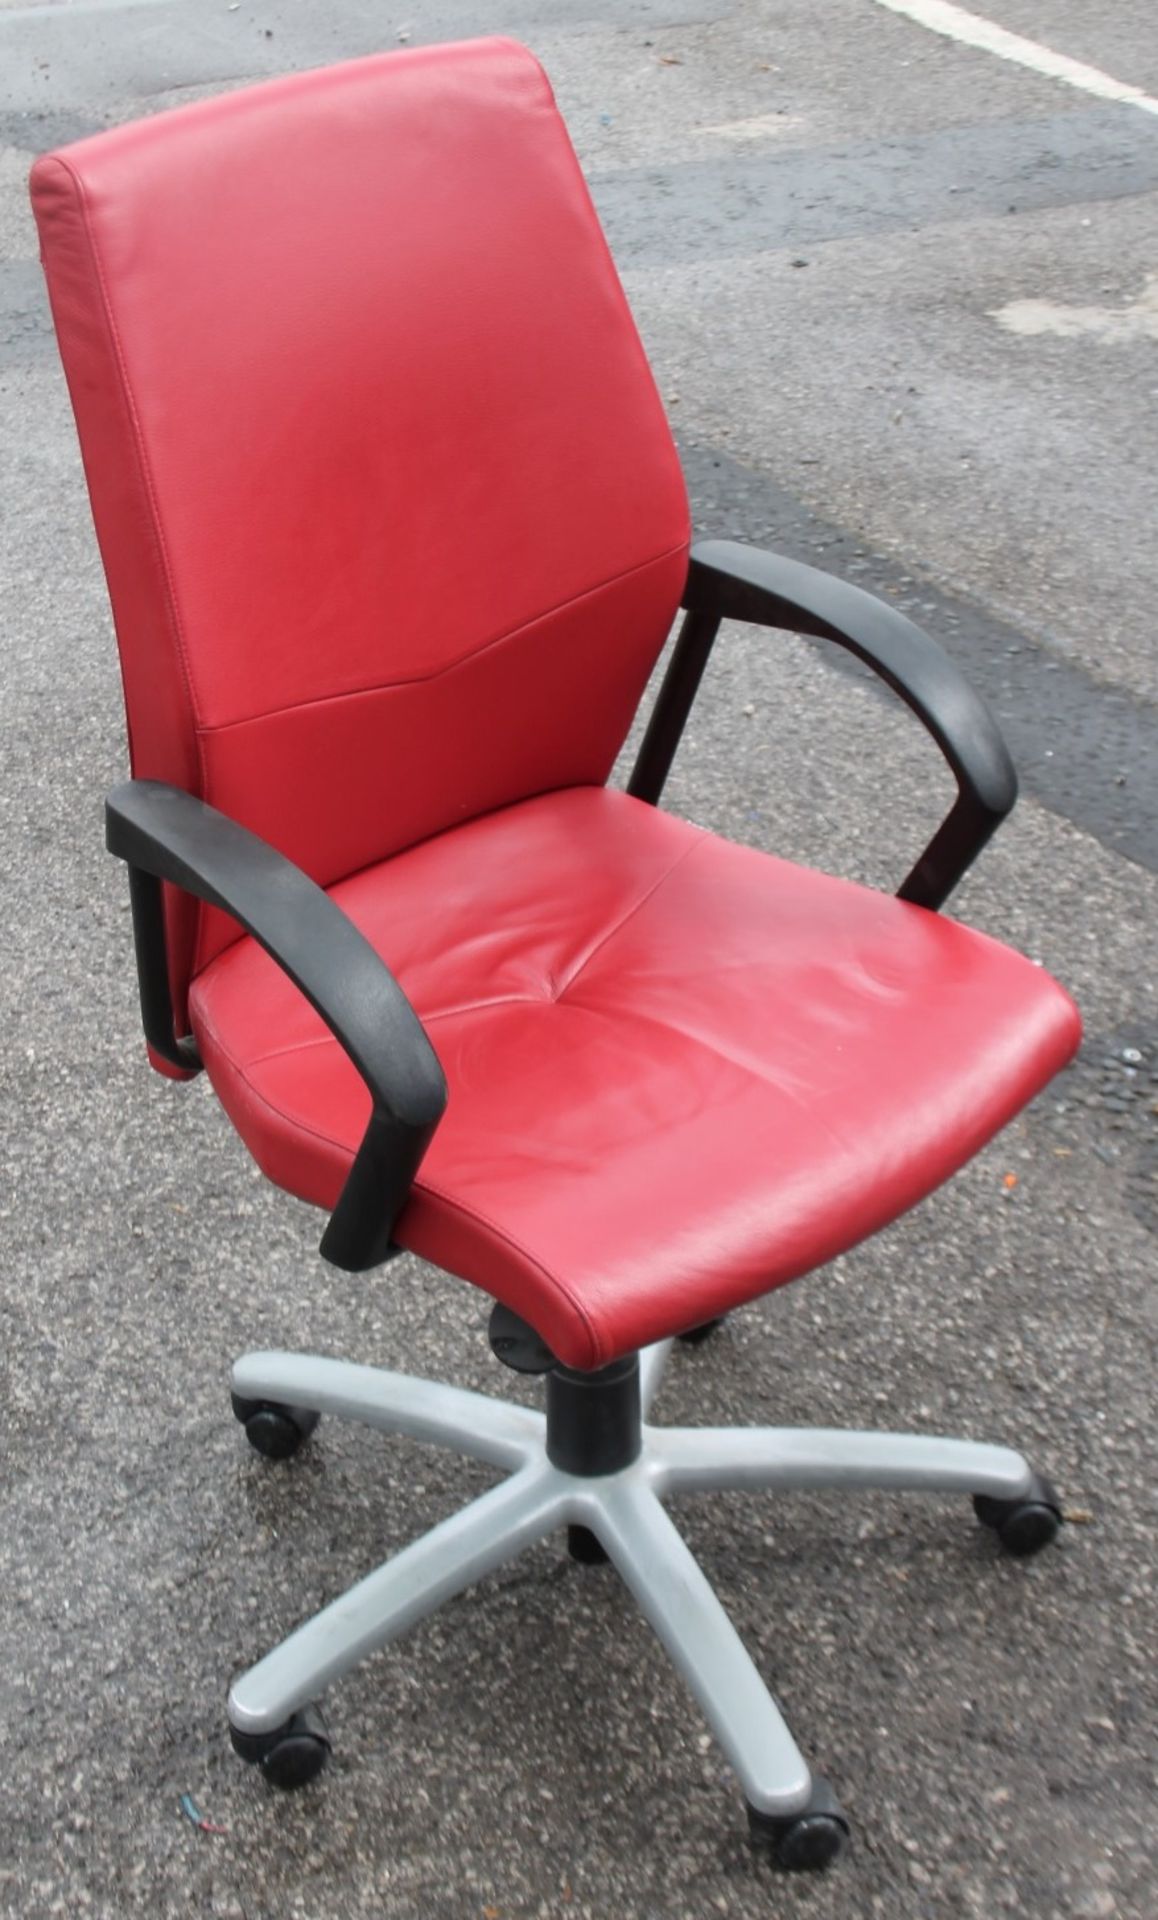 1 x VERCO Branded Gas Lift Swivel Chair Upholstered In A Red Faux Leather - Removed From An - Image 3 of 5